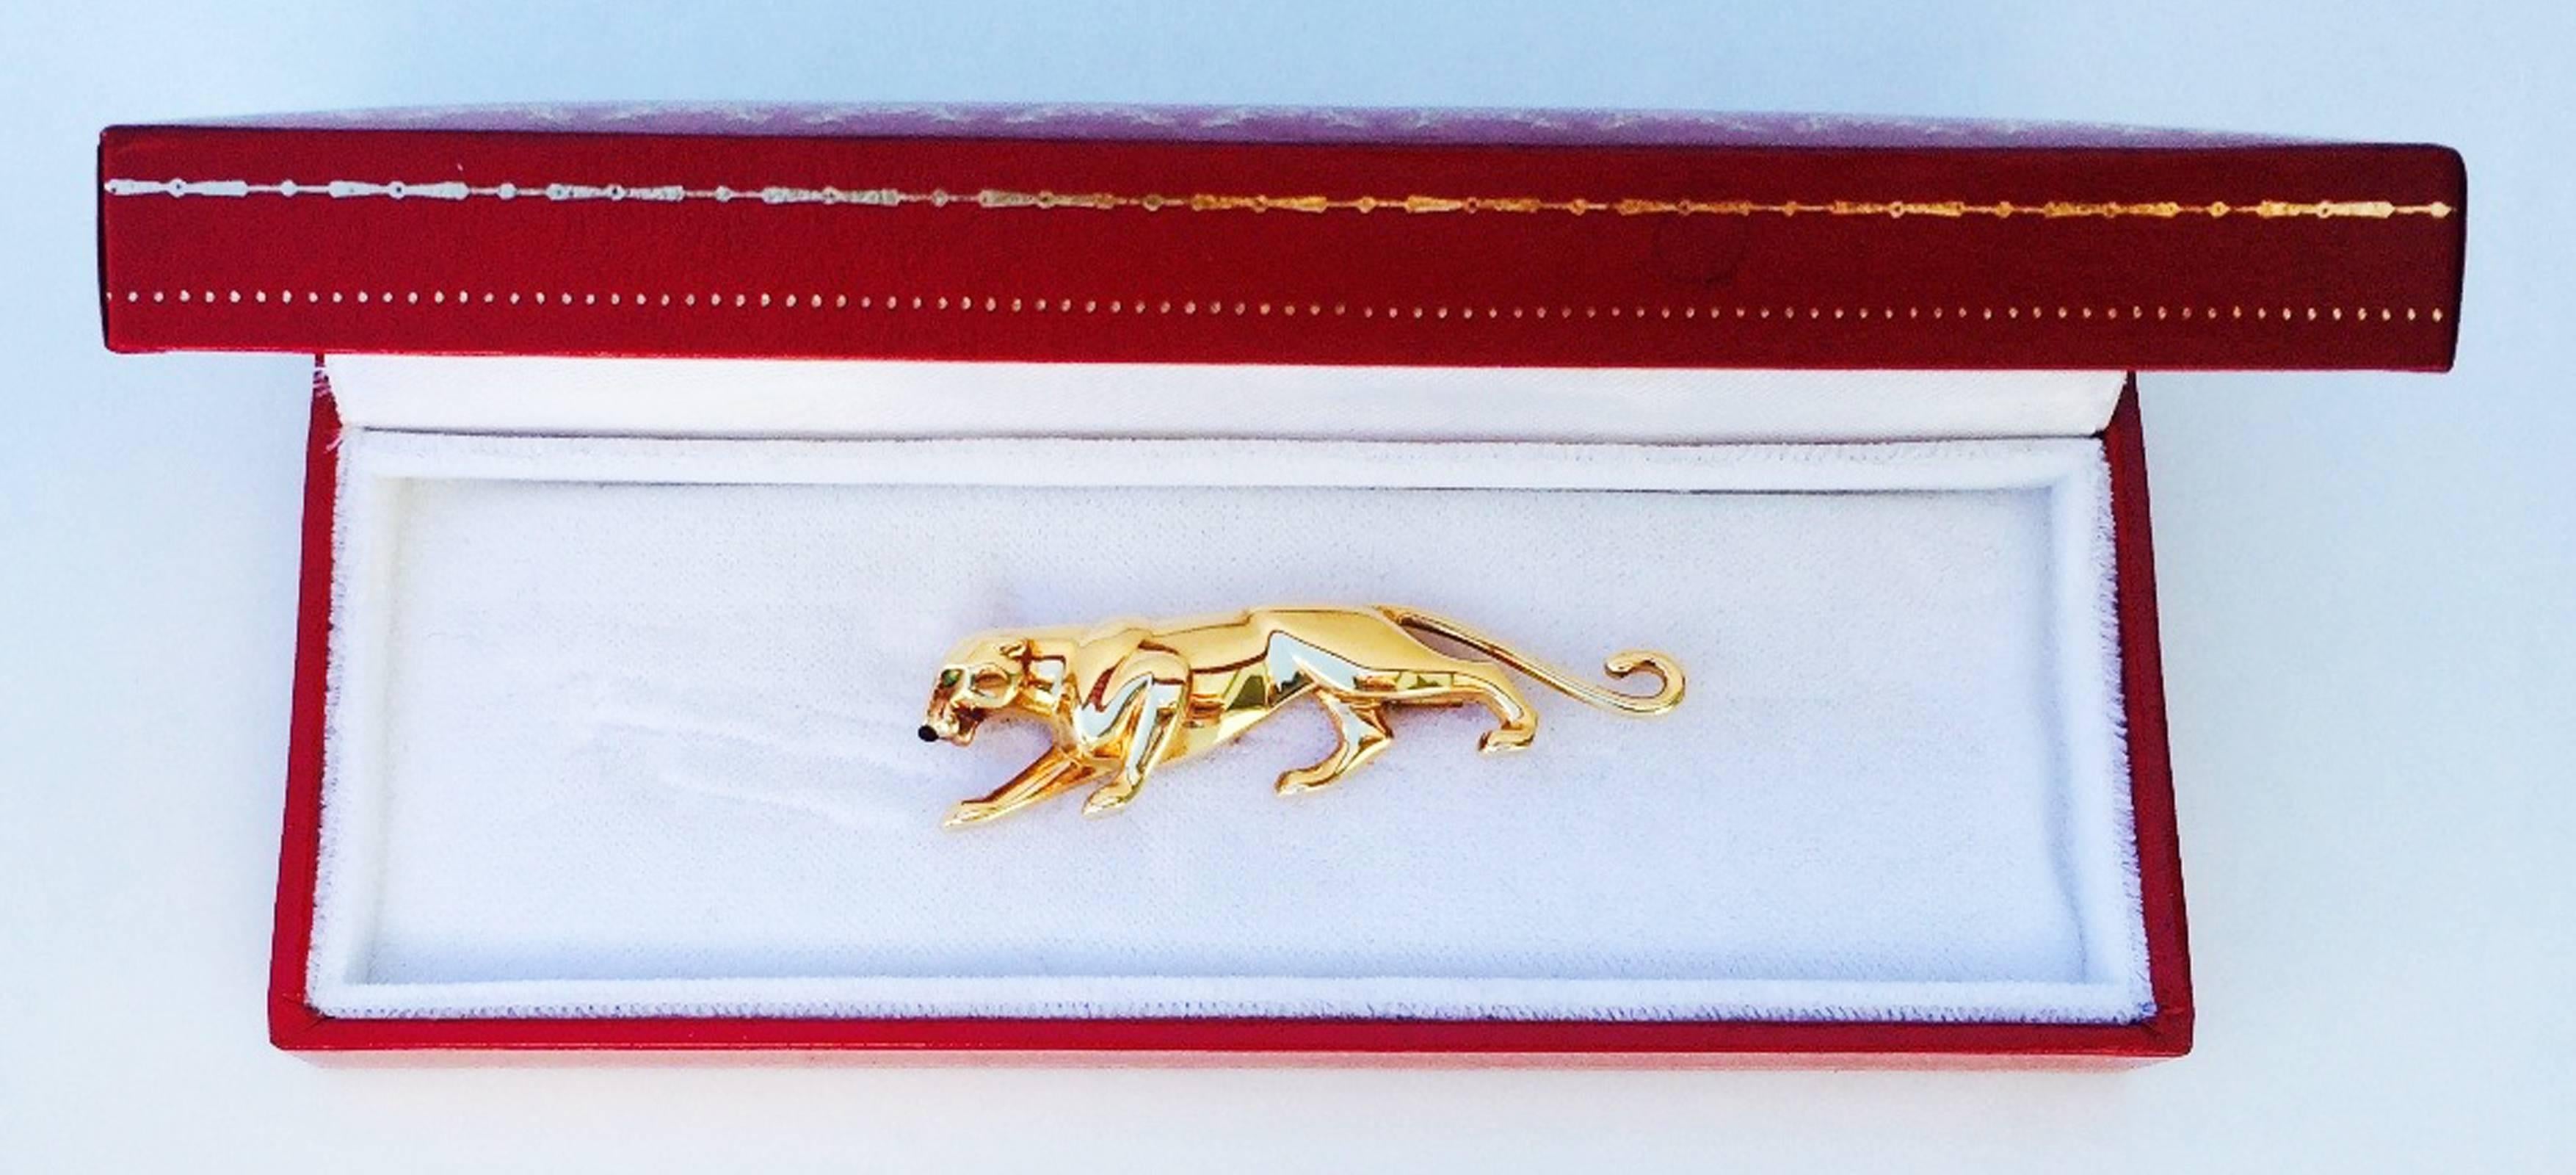 A fine Cartier Paris panther brooch. Signed and hallmarked yellow gold item features emerald eyes and black onyx nose. Original locking clip pin back and signature box included. Pristine.